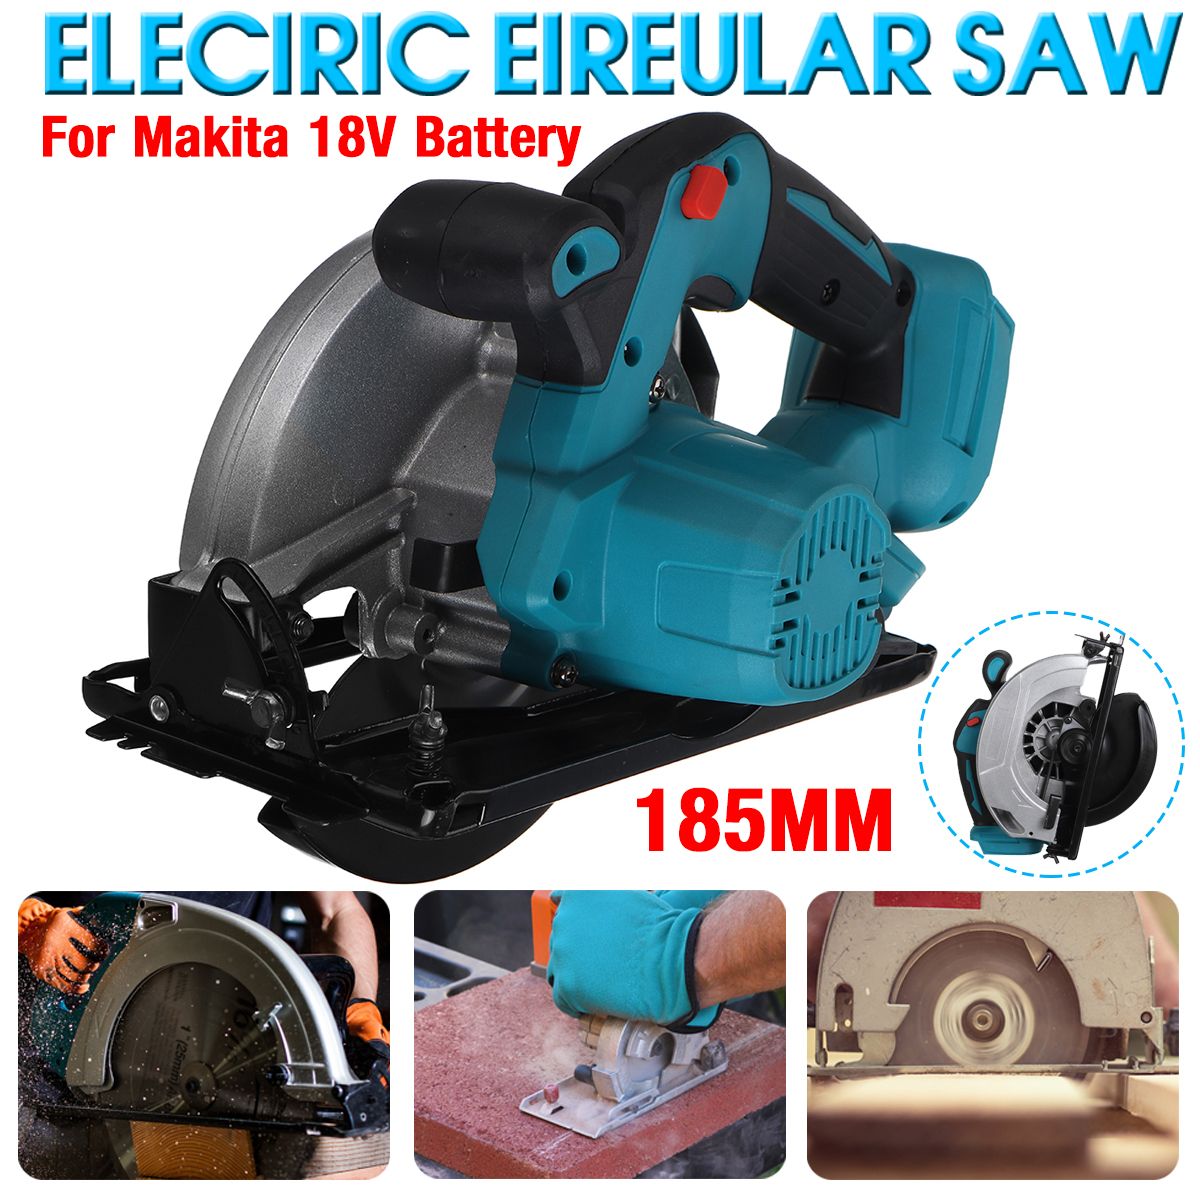 7-Inch-Electric-Circular-Saw-Household-Aluminum-Body-Portable-Woodworking-1748316